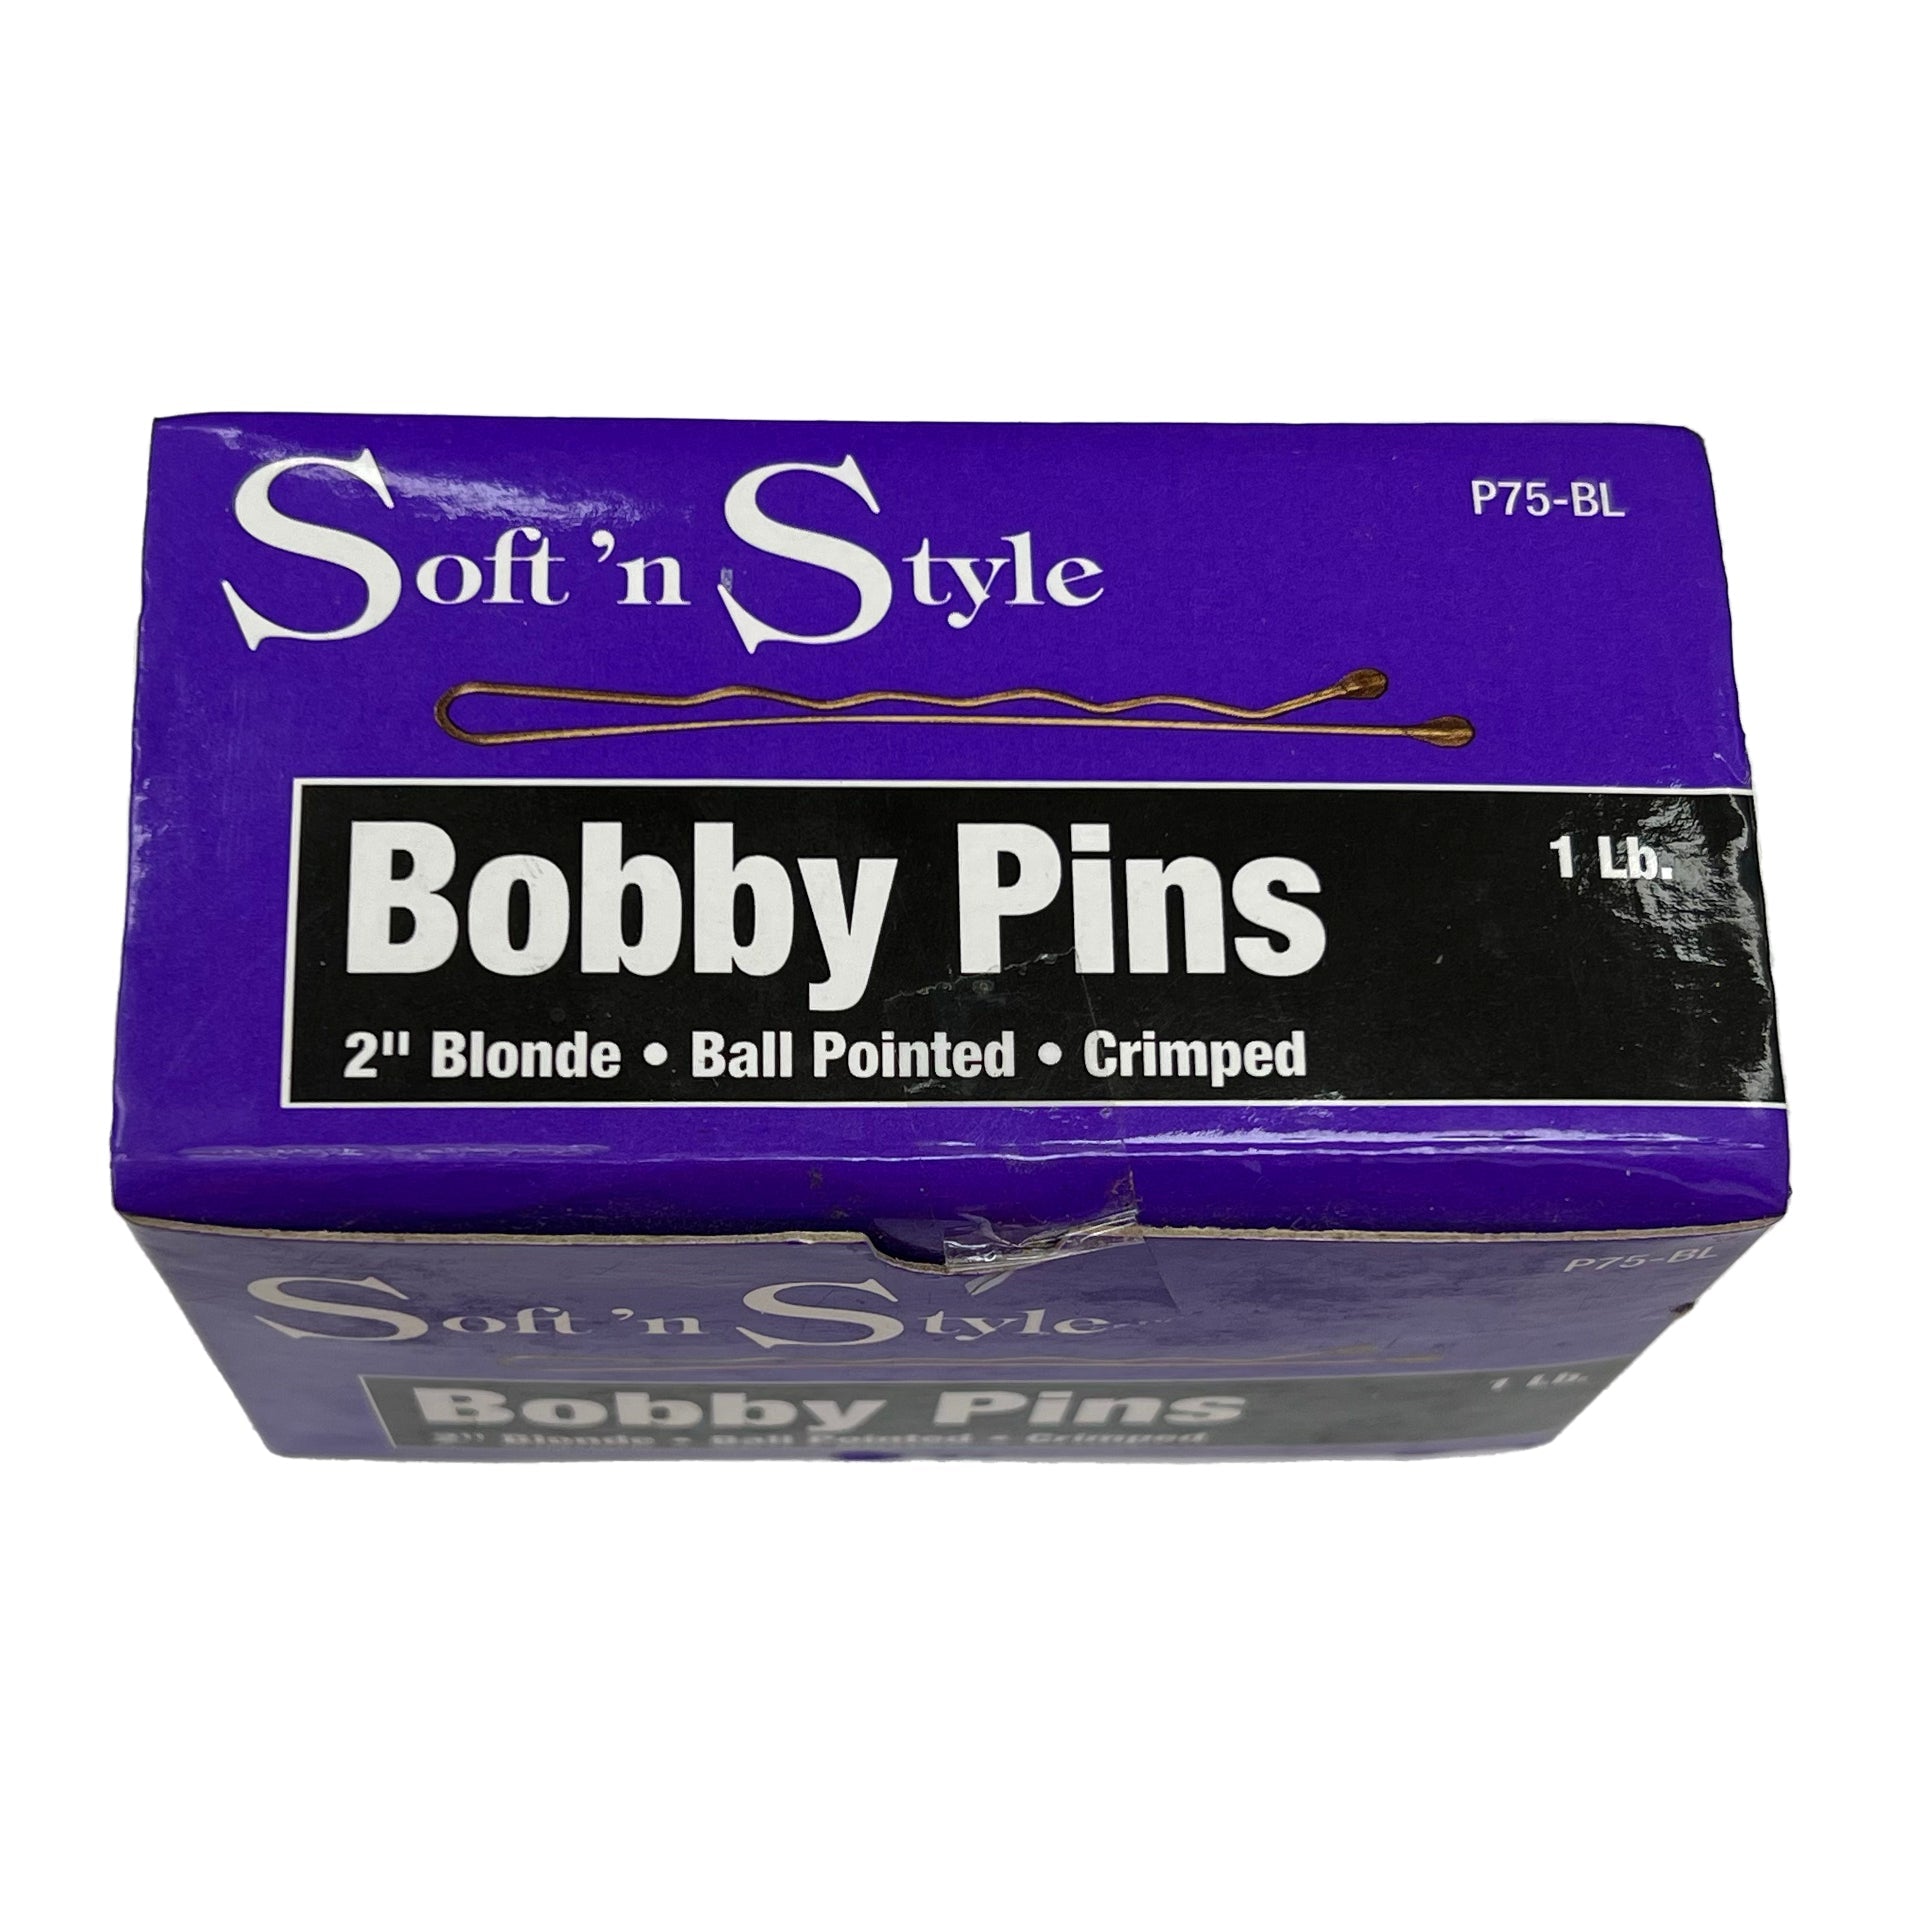 1 Lb. Bobby Pins | 2" | Ball Pointed | Crimped | SOFT N STYLE HAIR COLORING ACCESSORIES SOFT N STYLE Blonde 